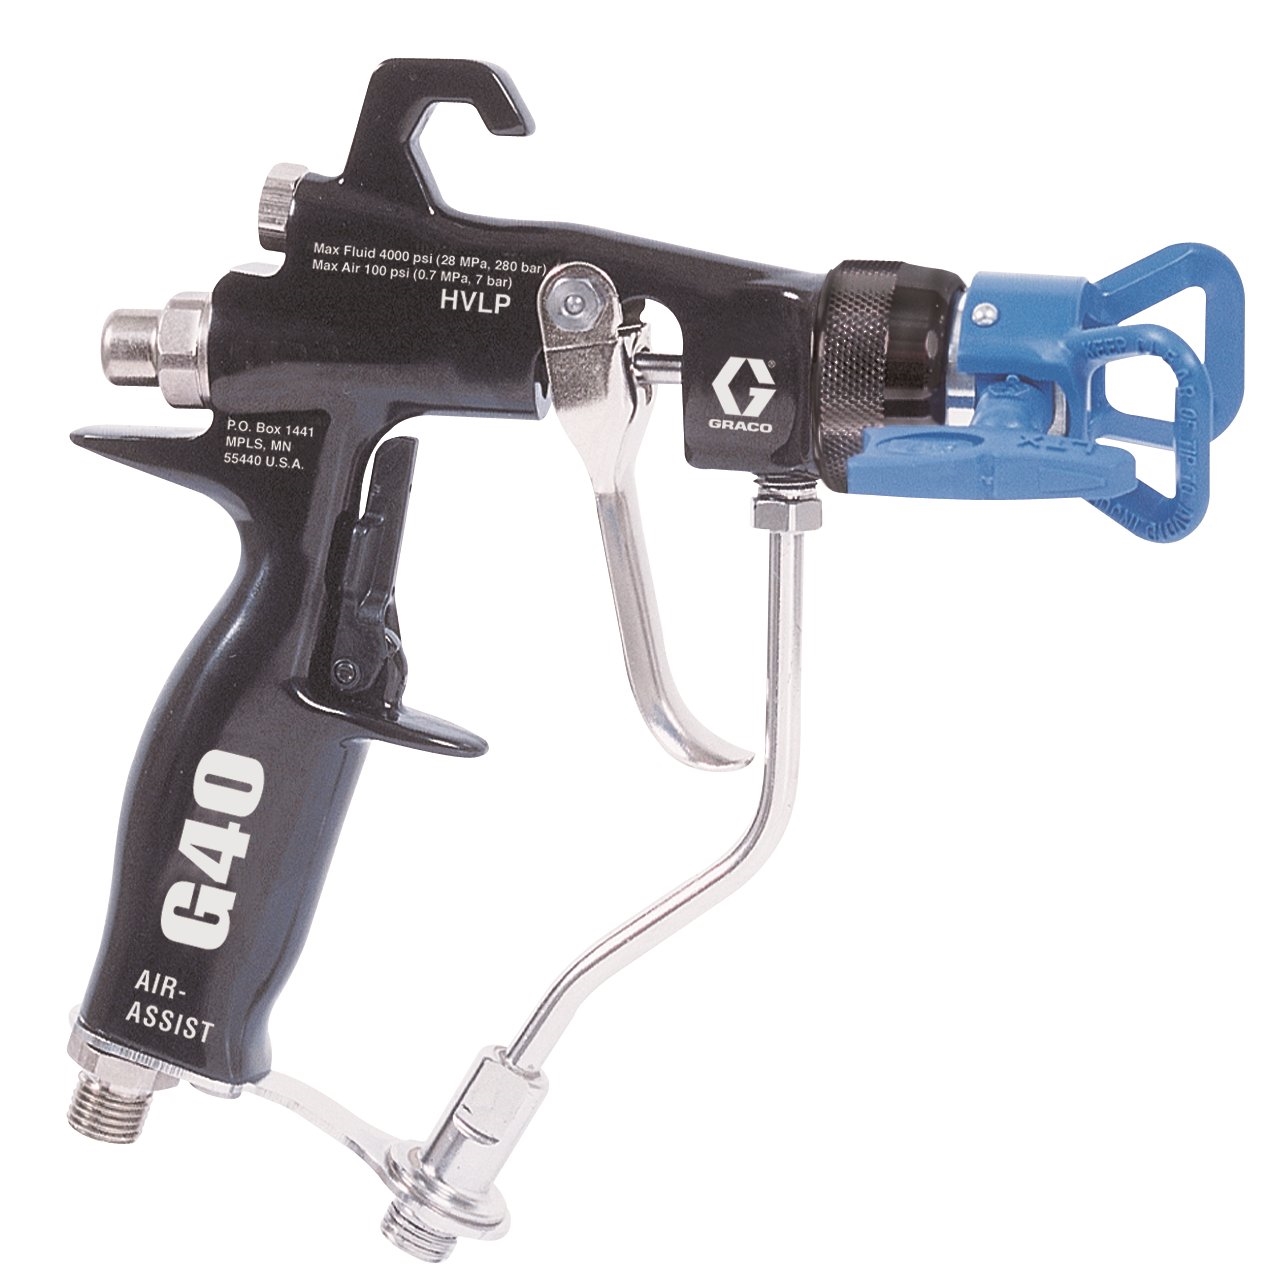 G40 air-assisted spray guns can be shipped quickly whenever wood finishers need them.